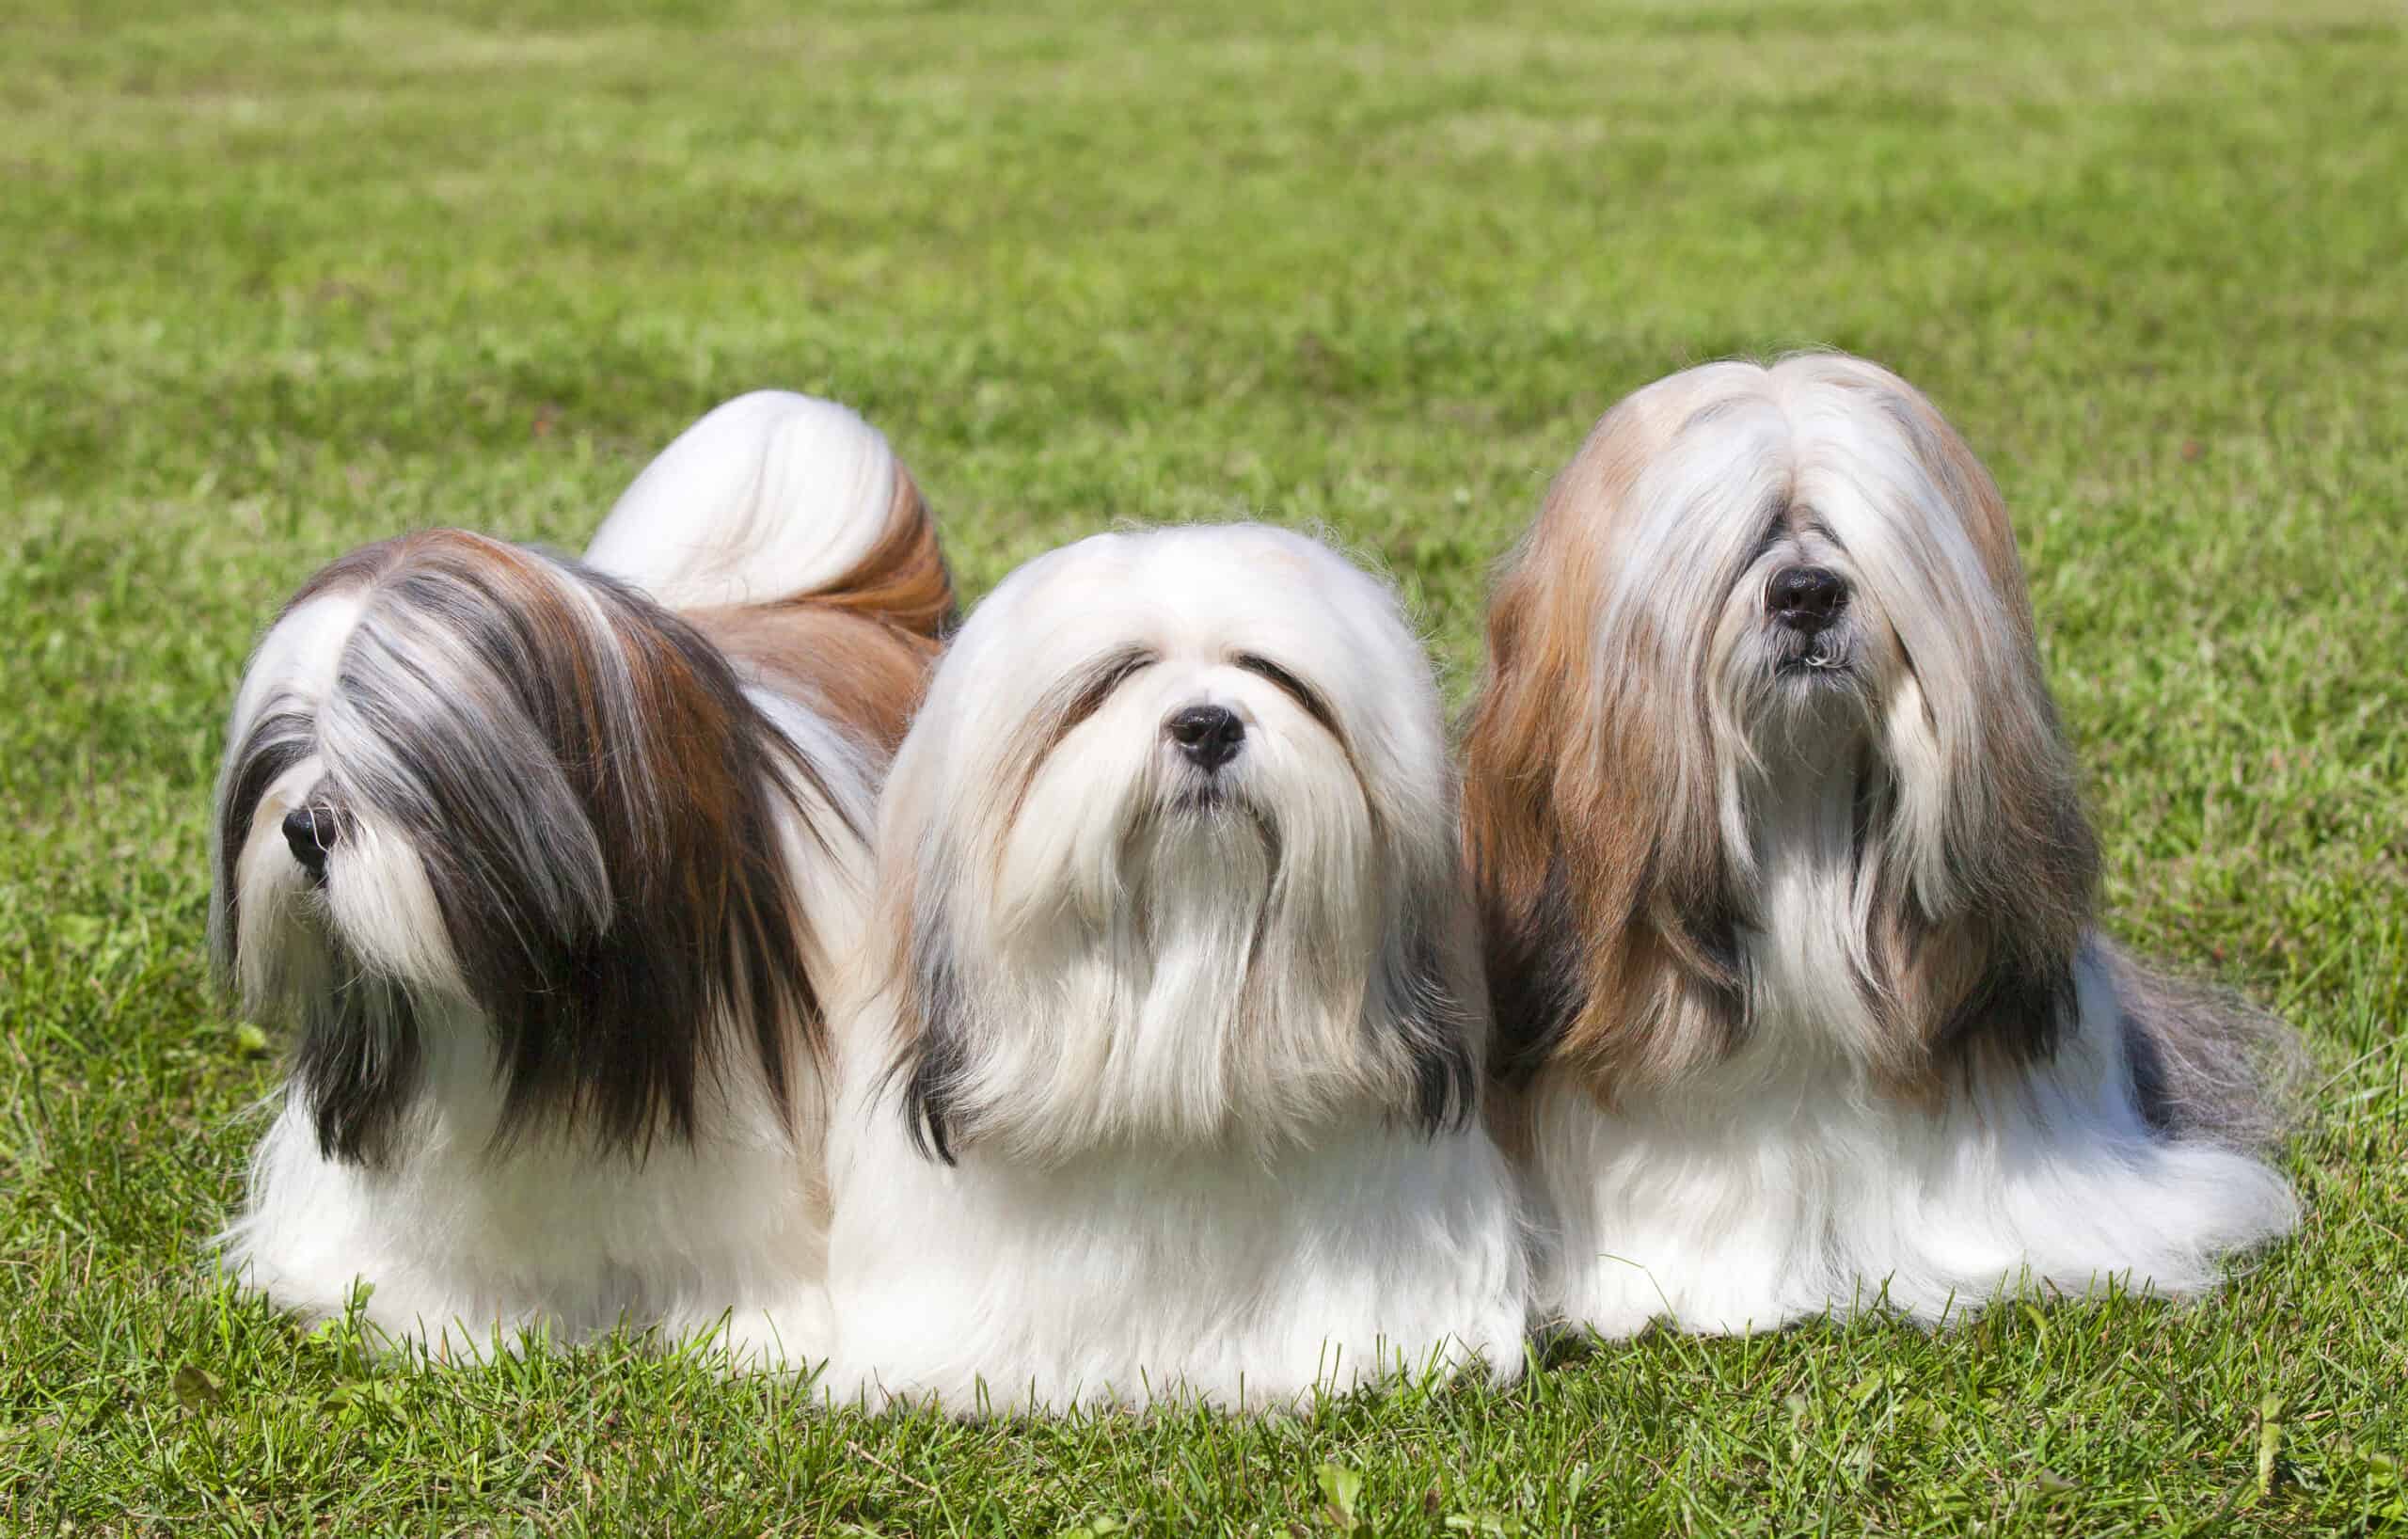 3 purebred Lhasa Apso on the grass.